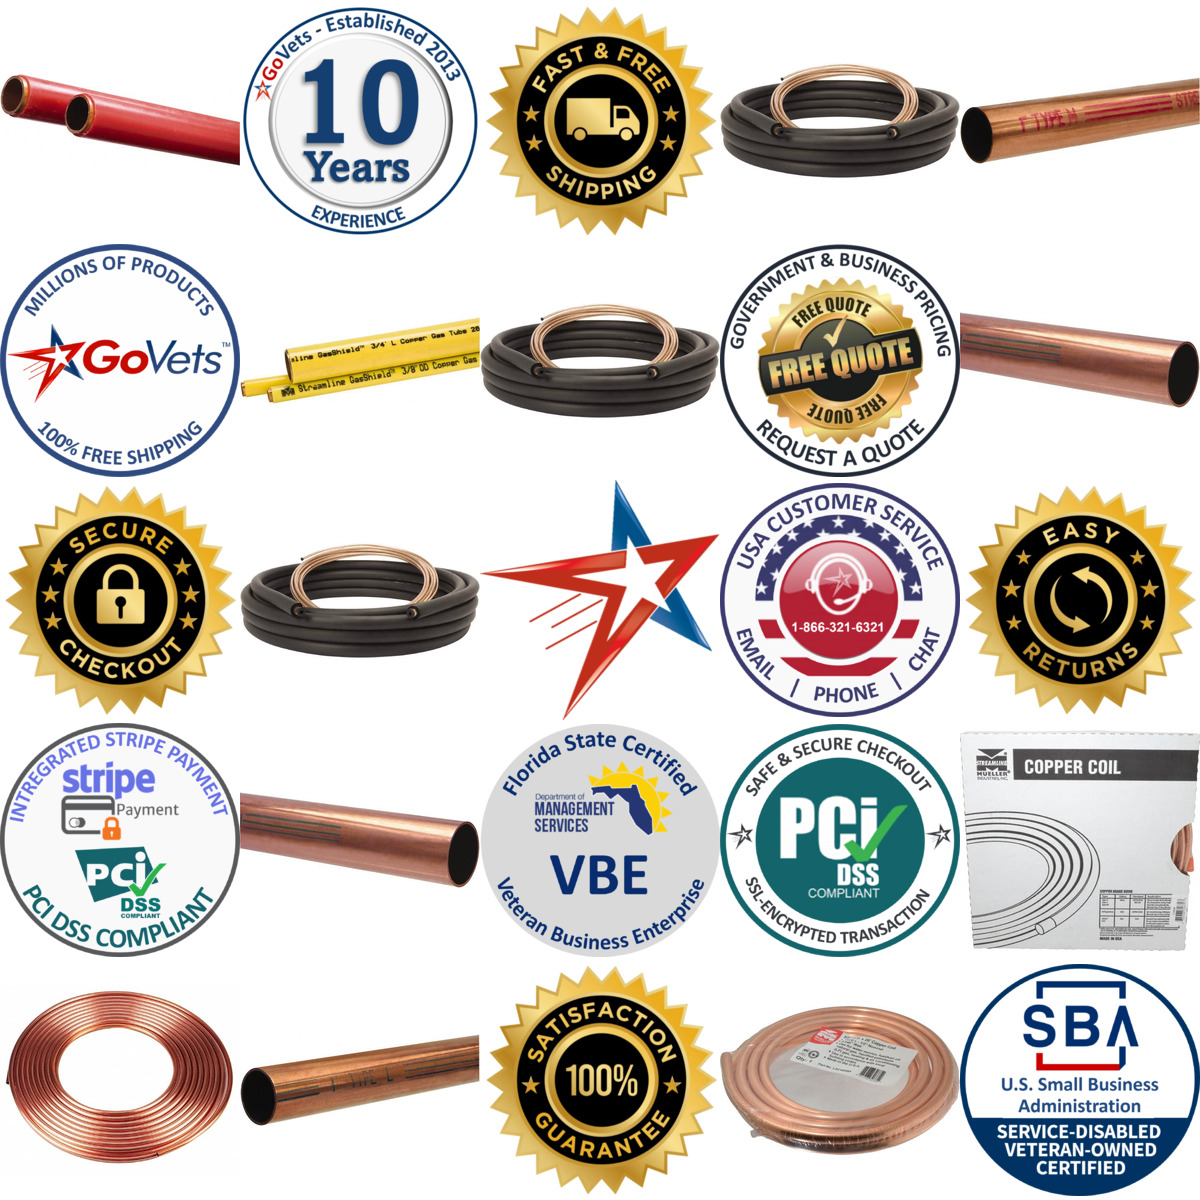 A selection of Mueller Industries products on GoVets